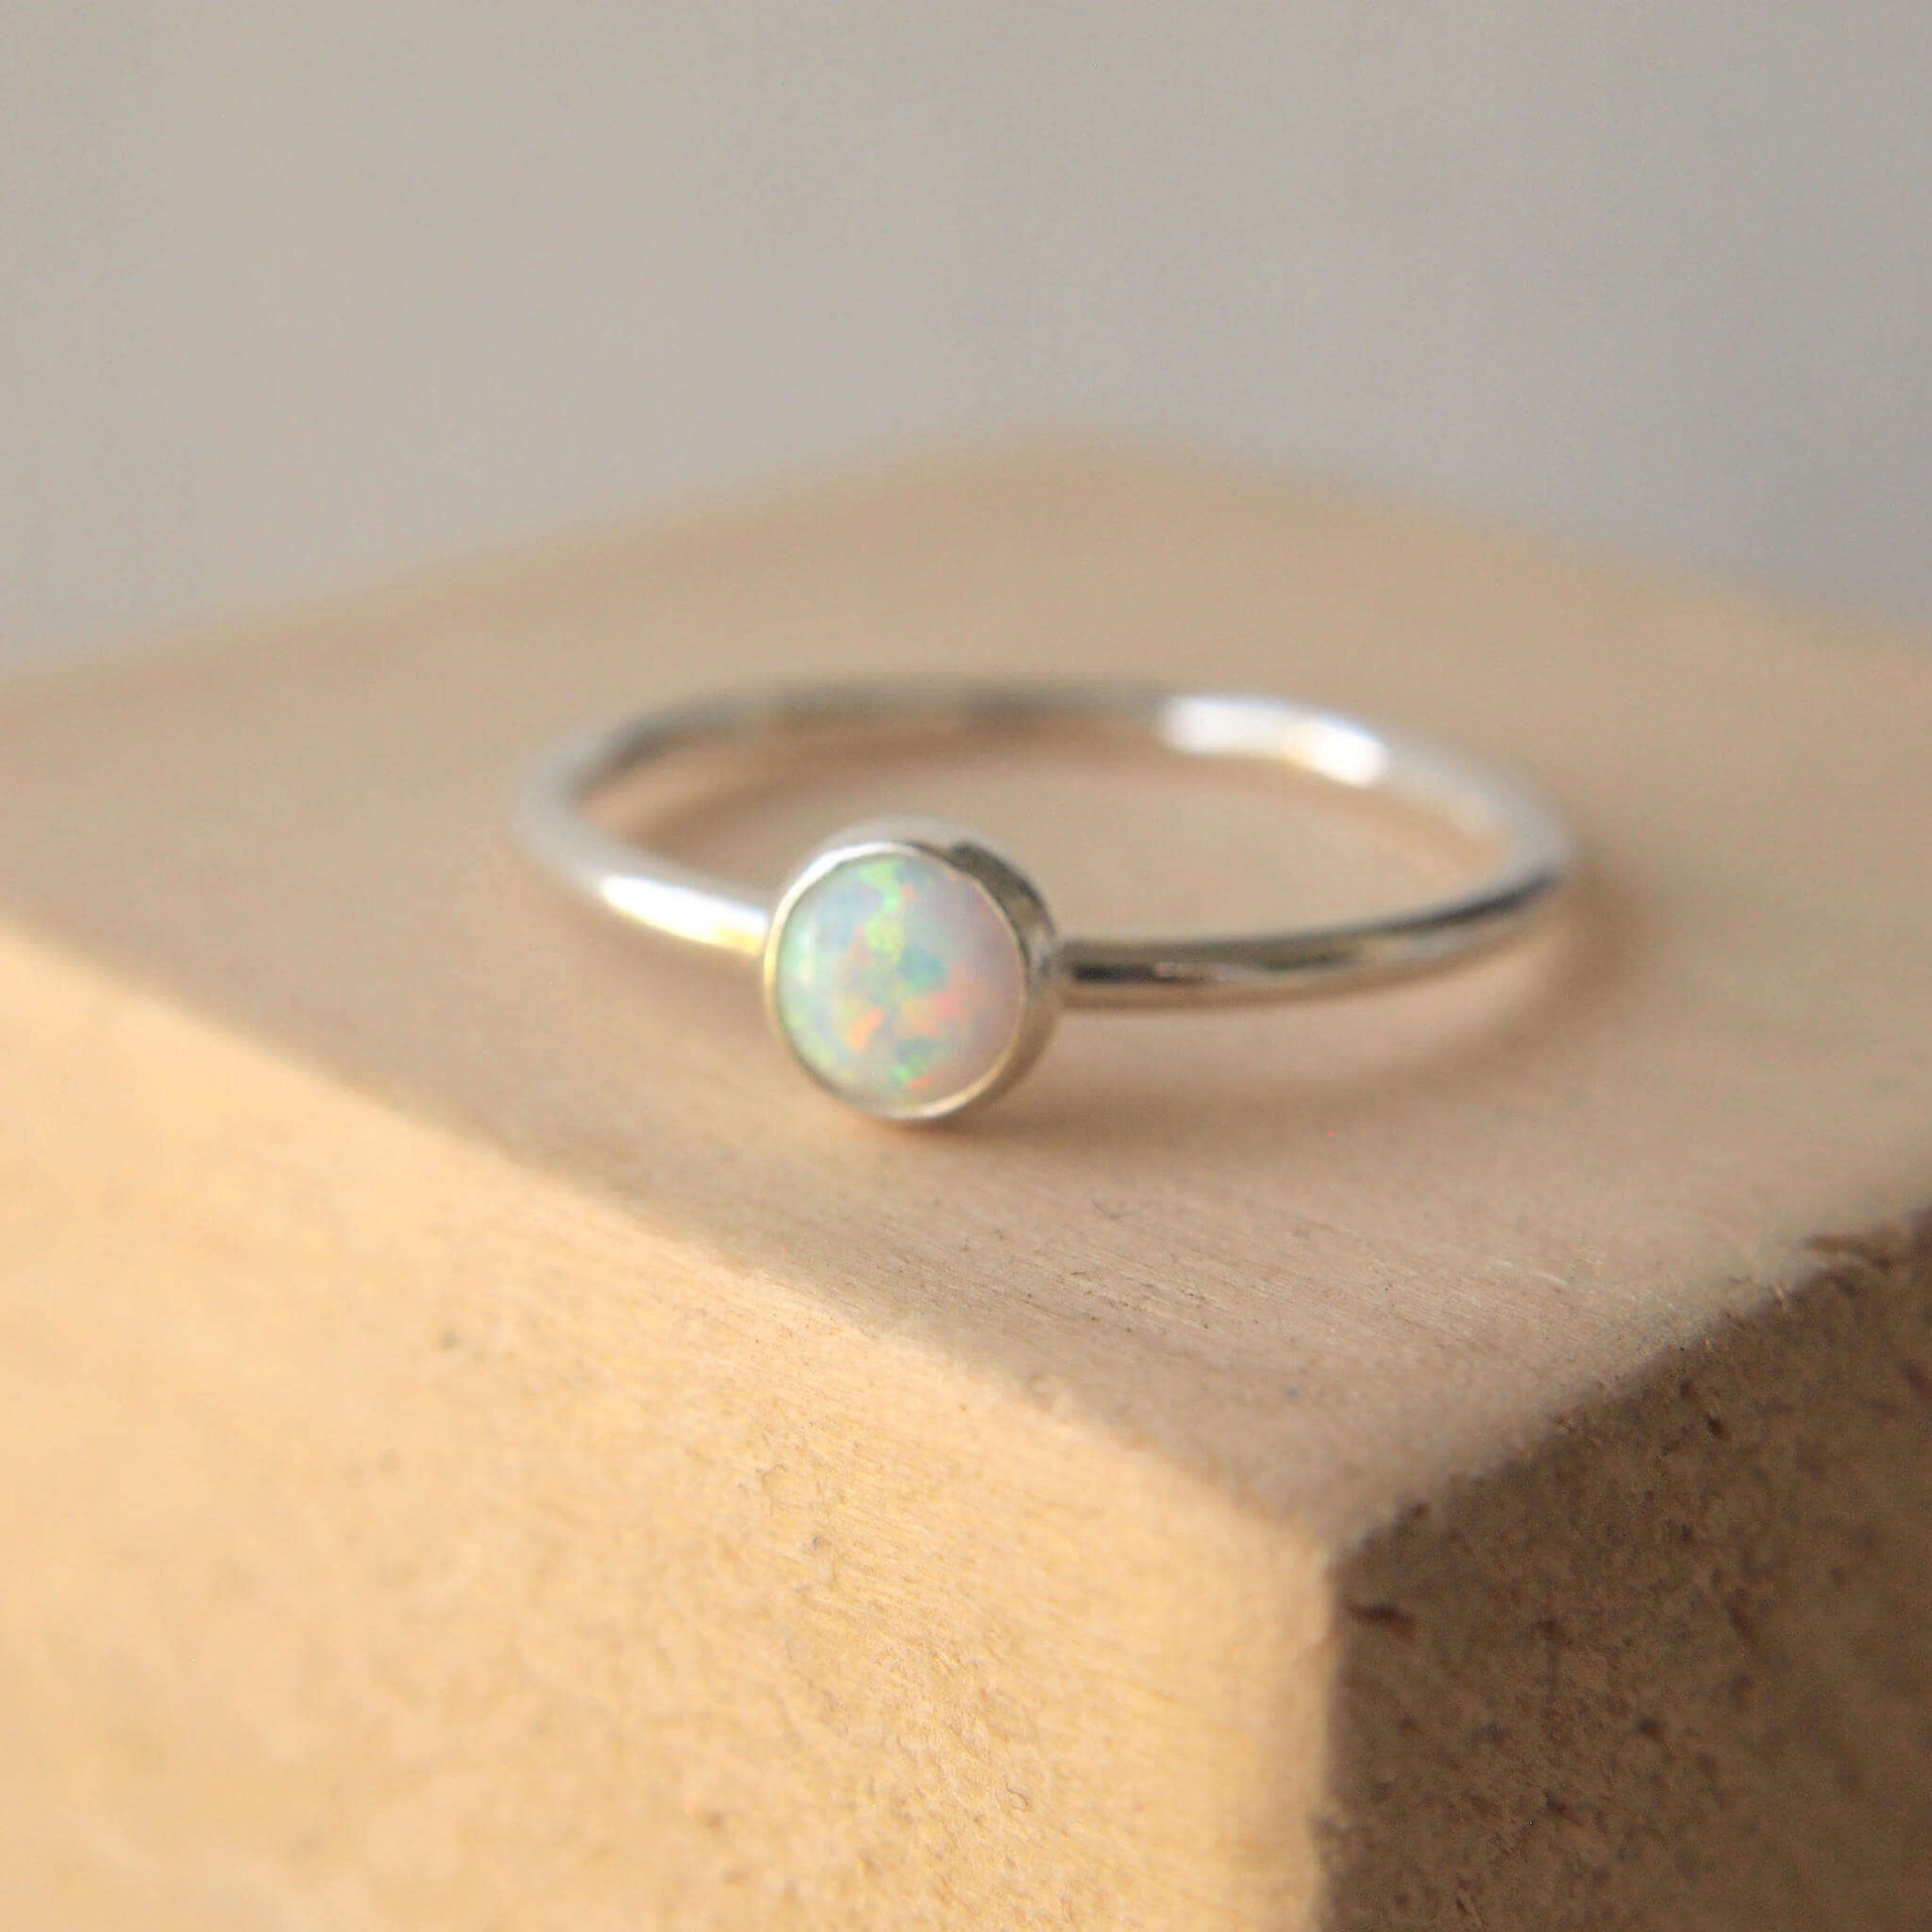 Lab Opal birthstone stacking ring with 5mm gemstone. Hand made in Scotland by maram jewellery